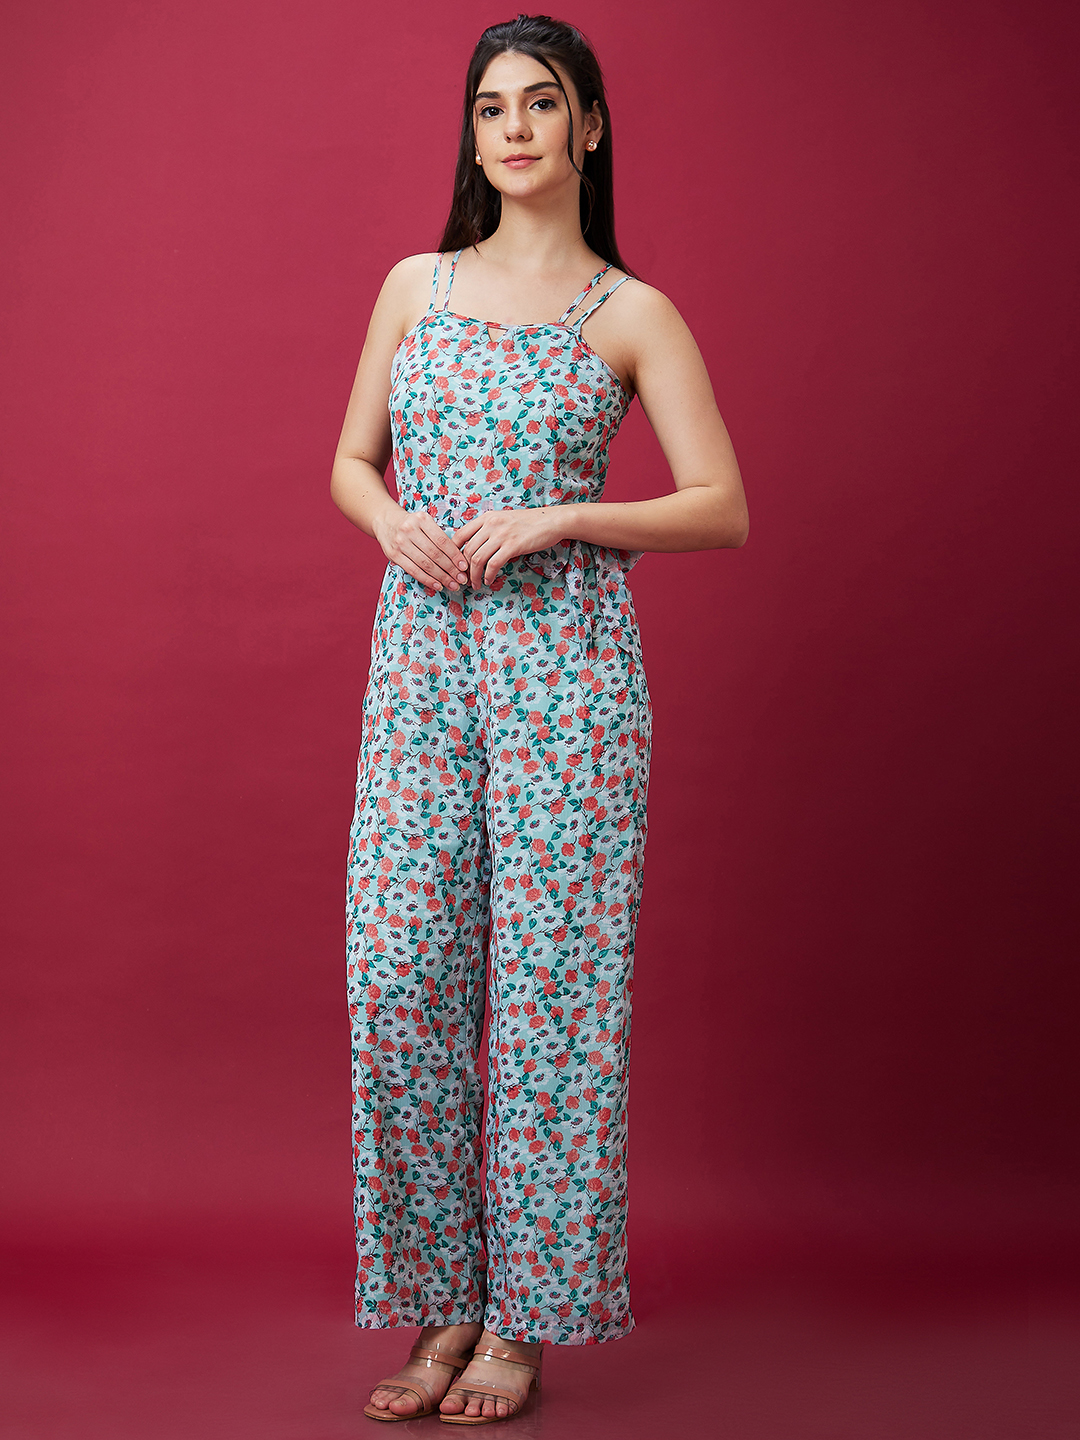 Globus Women Multi Blue Floral Printed Strappy Waist Tie-Up Casual Jumpsuit